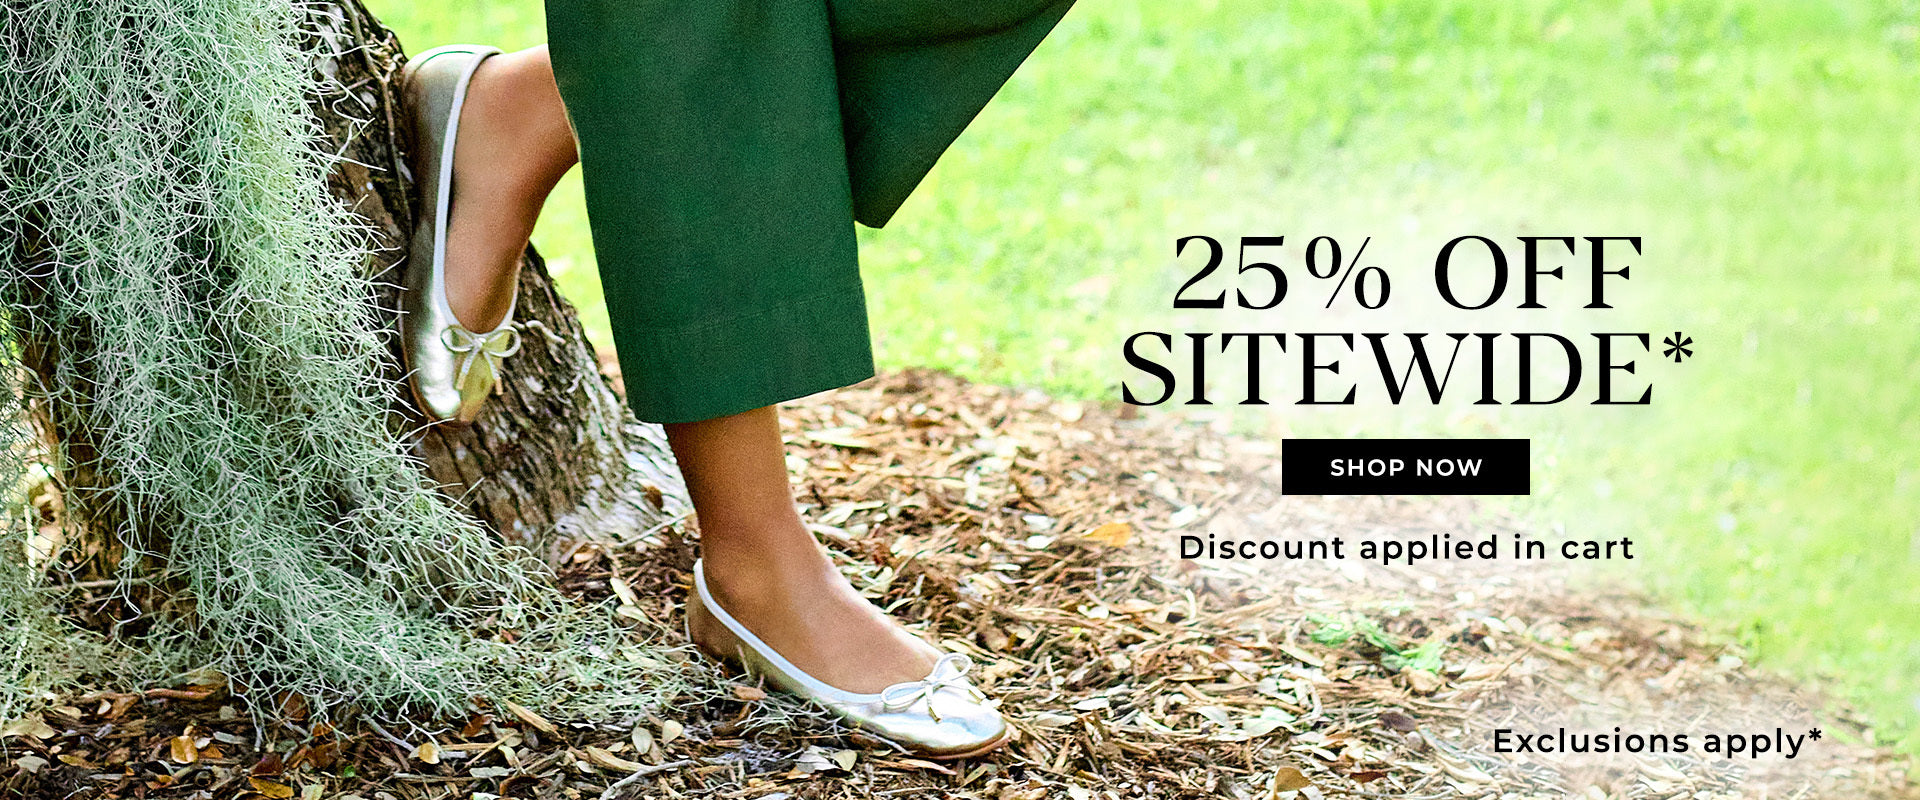 aerosoles comfortable women's shoes 25% off sitewide* exclusions apply